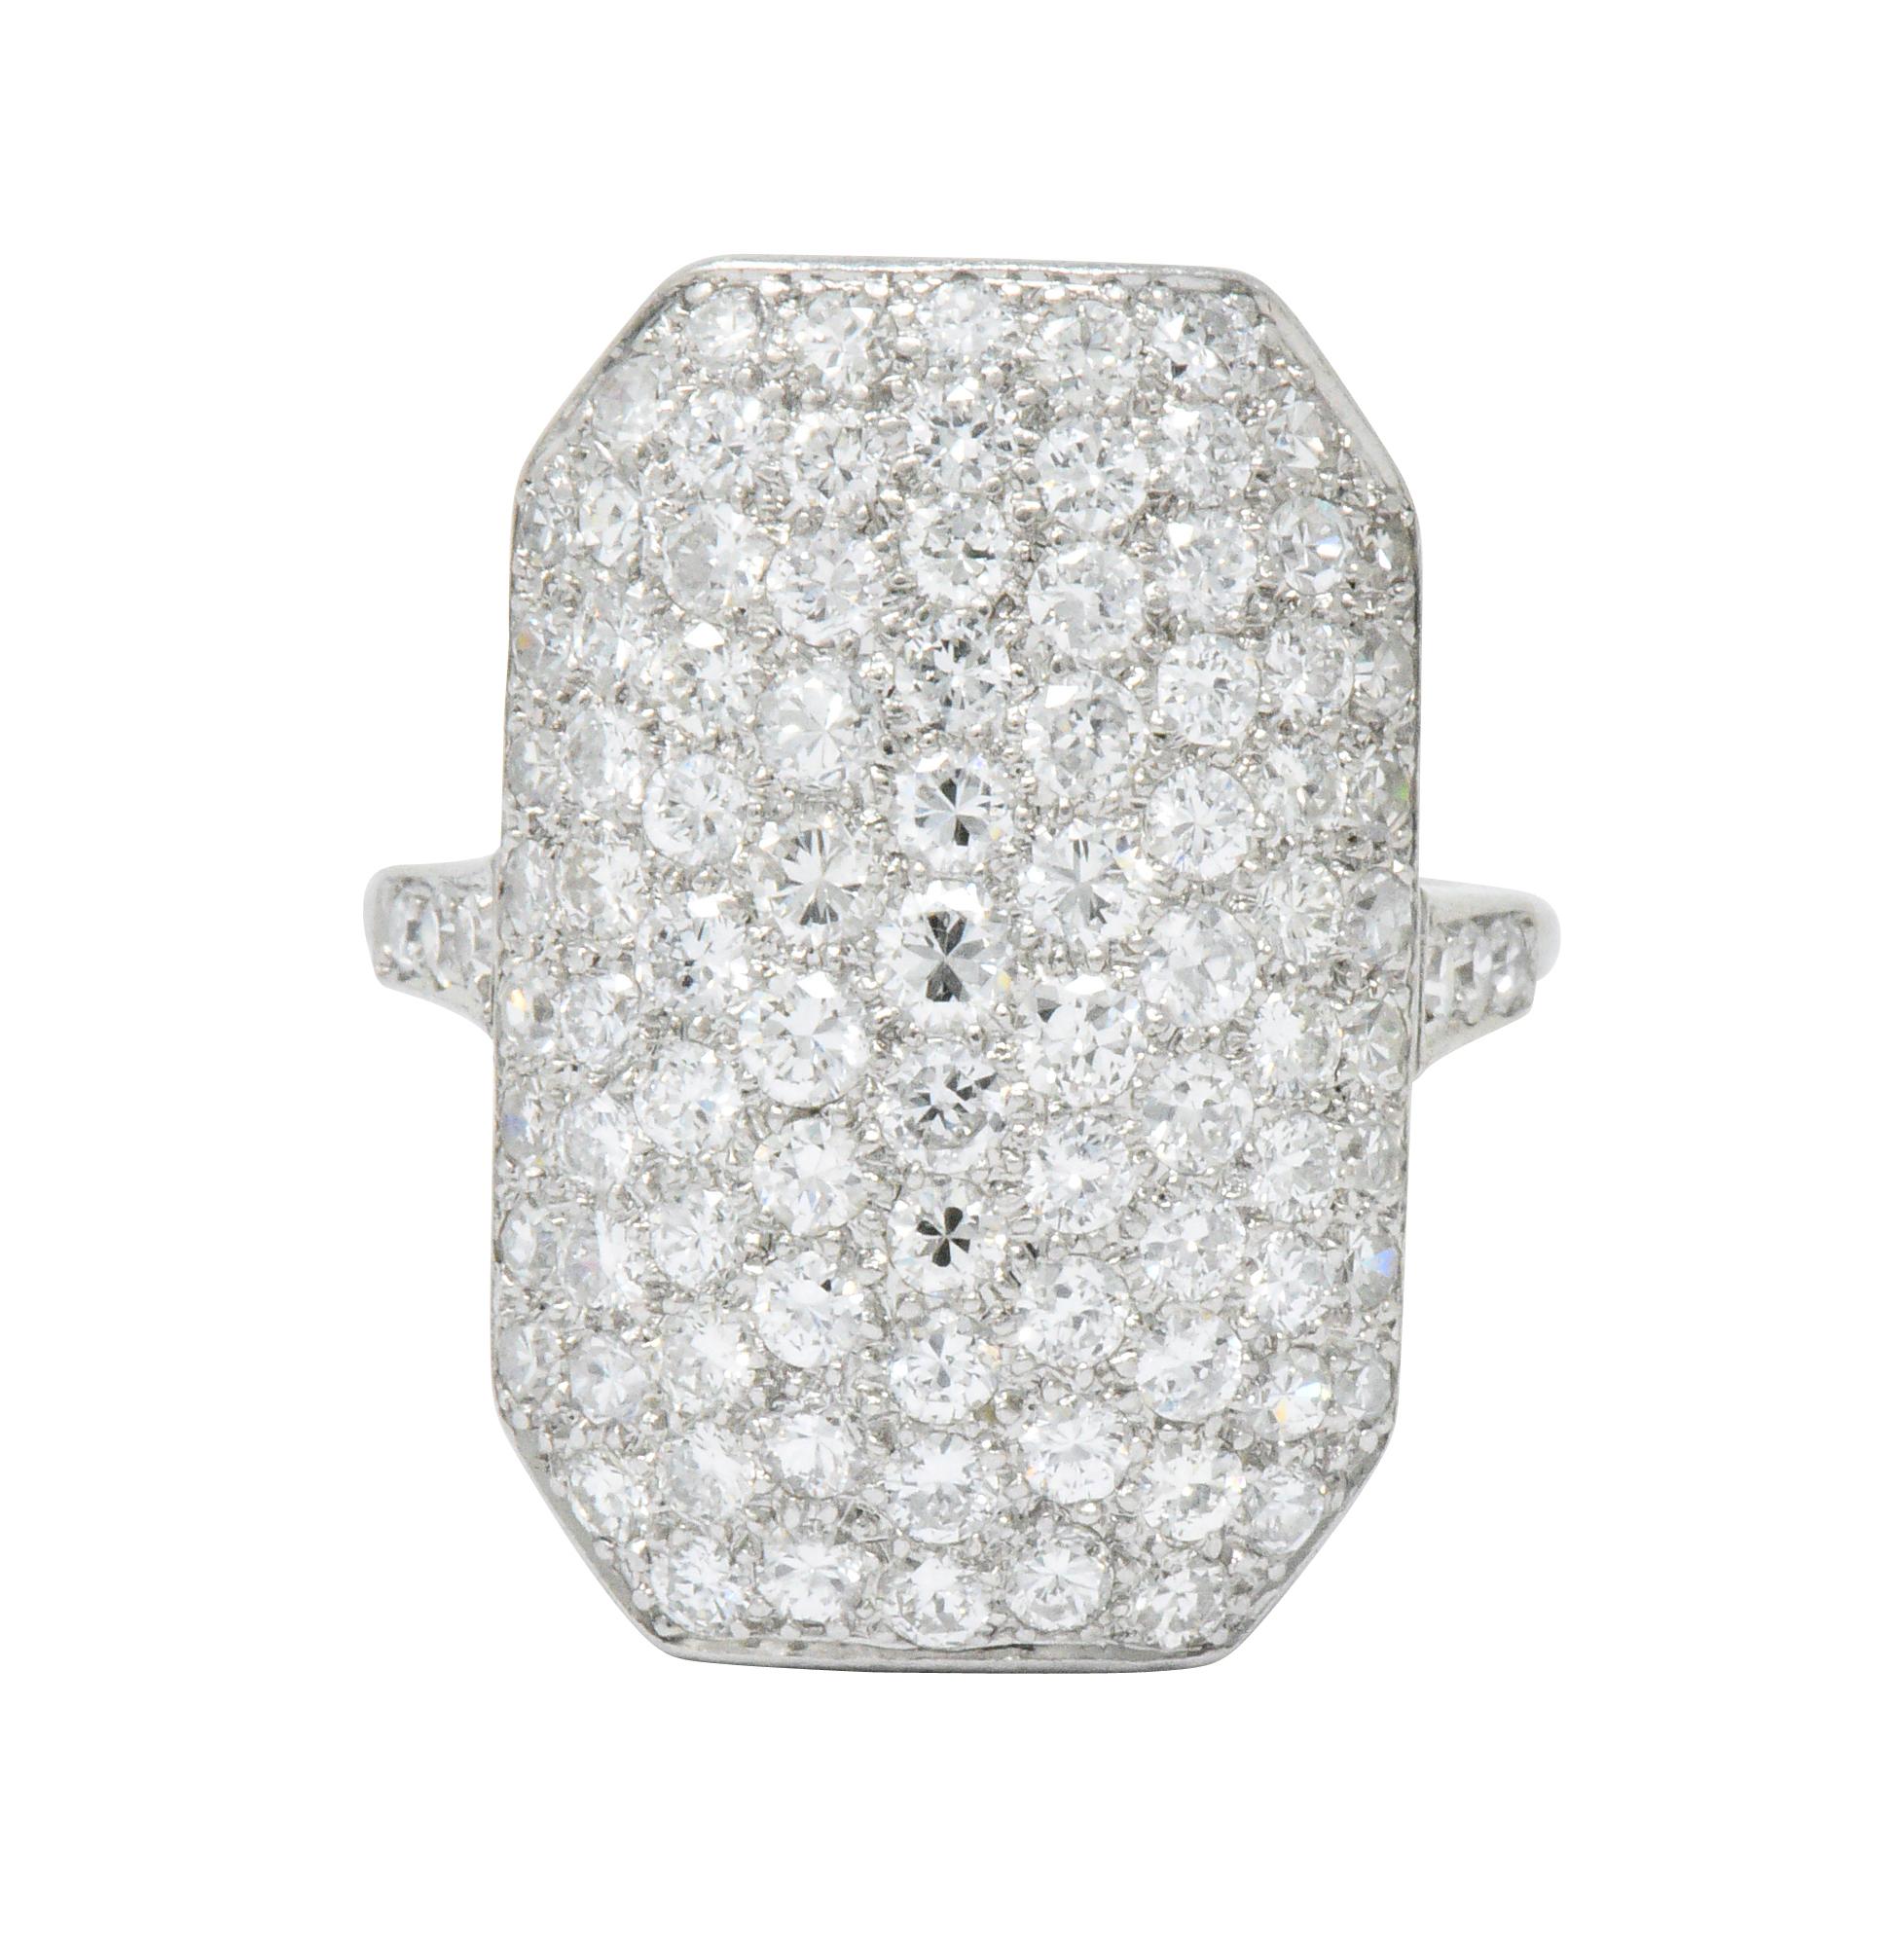 Featuring a cut-corner rectangular top with pavé set transitional cut diamonds and diamonds on the shoulders

Total diamond weight approximately 3.74 carats, G/H color and VS clarity

Pierced and scrolling detailed gallery

Unique ring with abundant